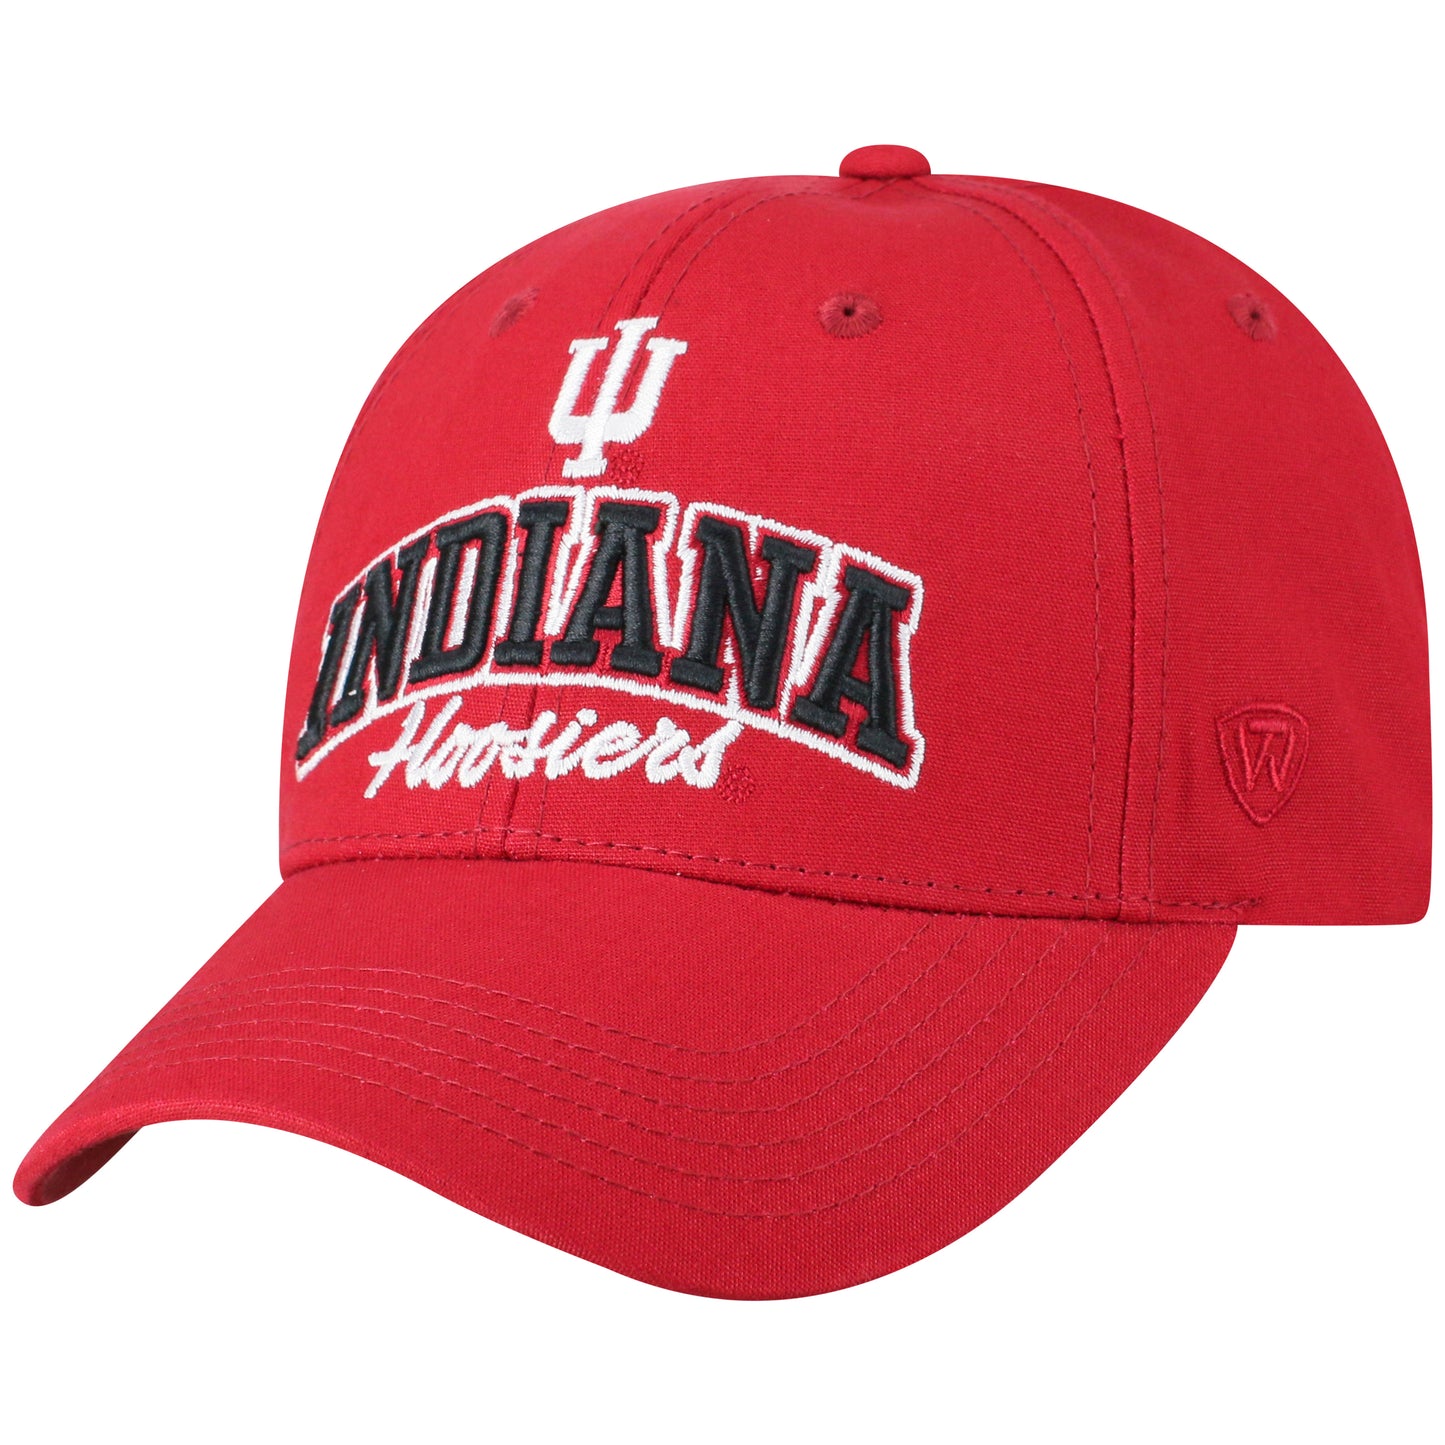 Mens Indiana Hoosiers Advisor Adjustable Hat By Top Of The World